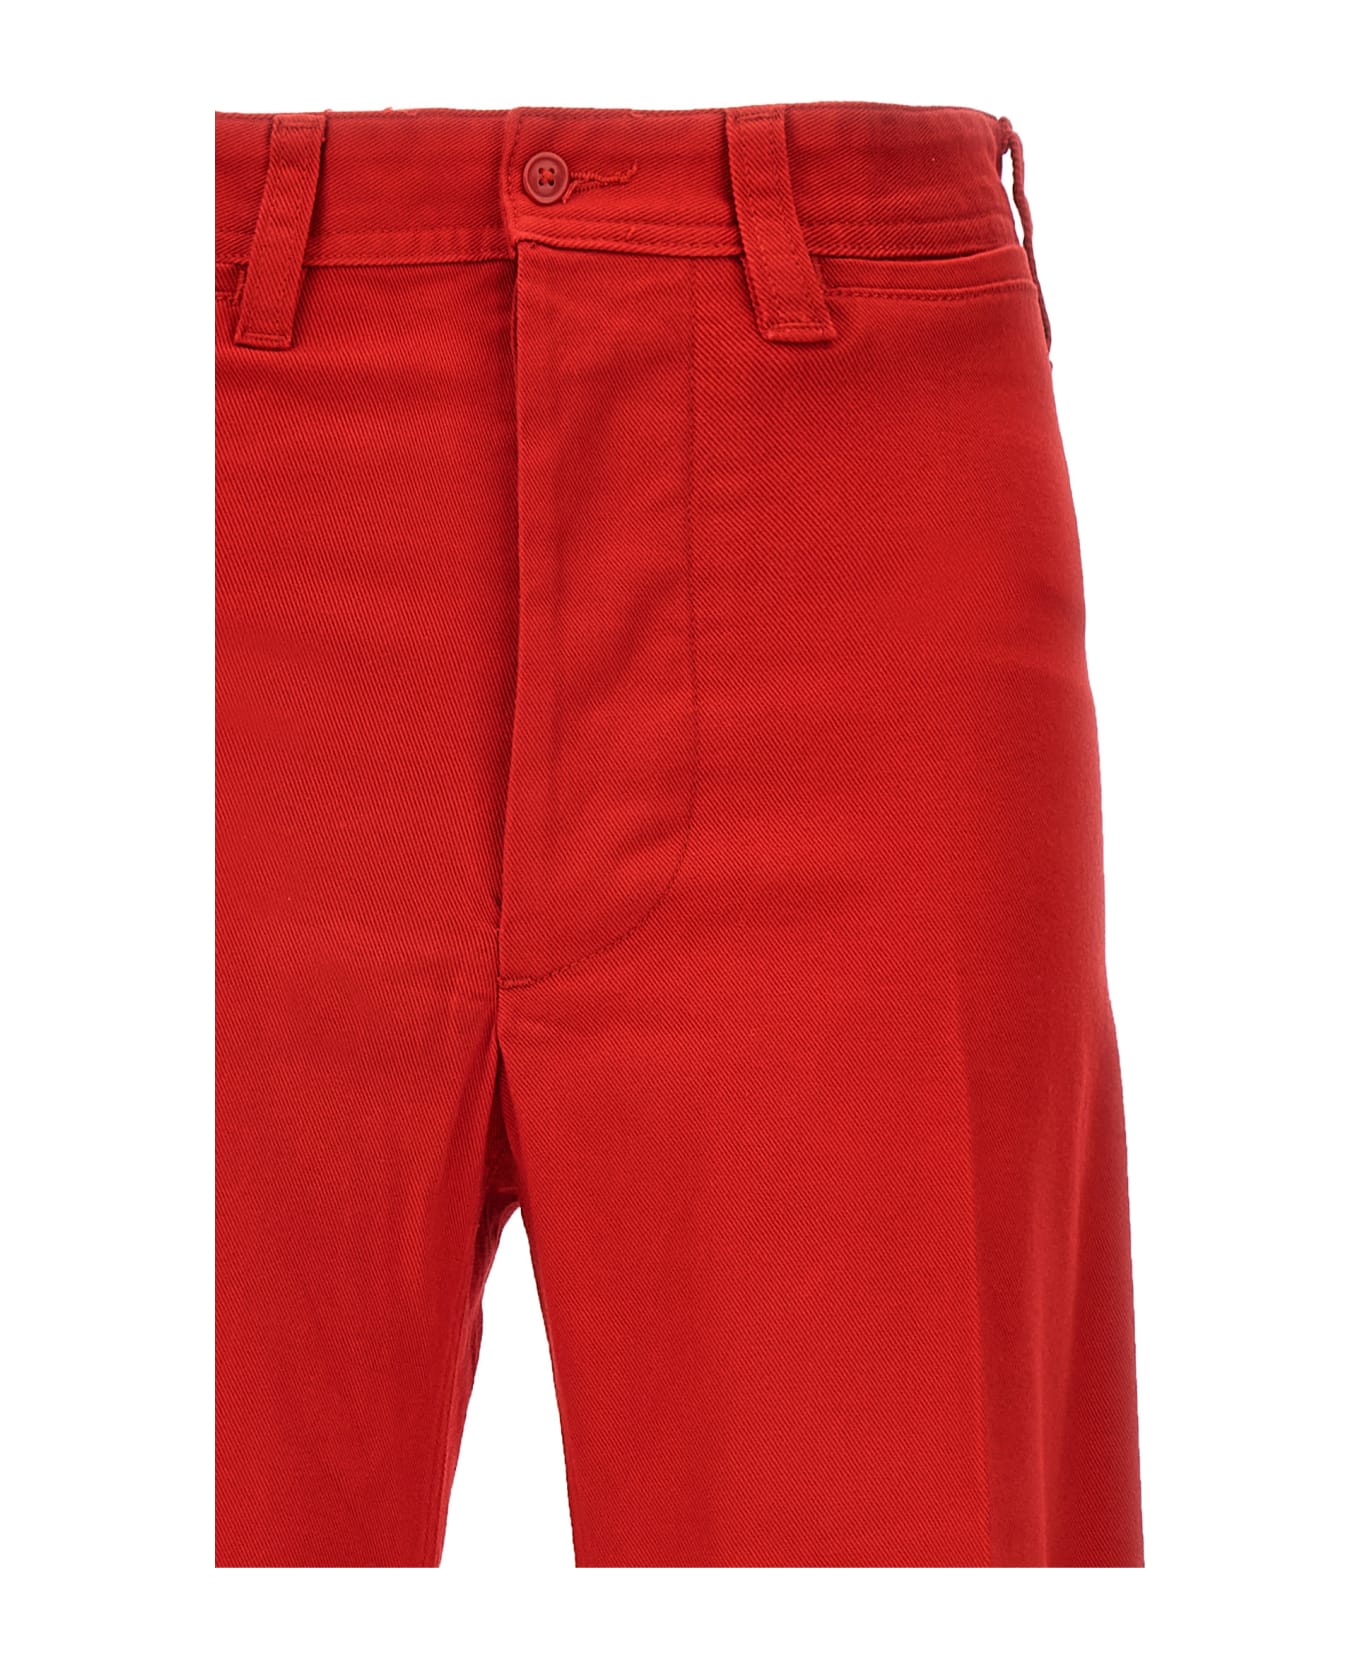 Polo Ralph Lauren Flared Pants - Red